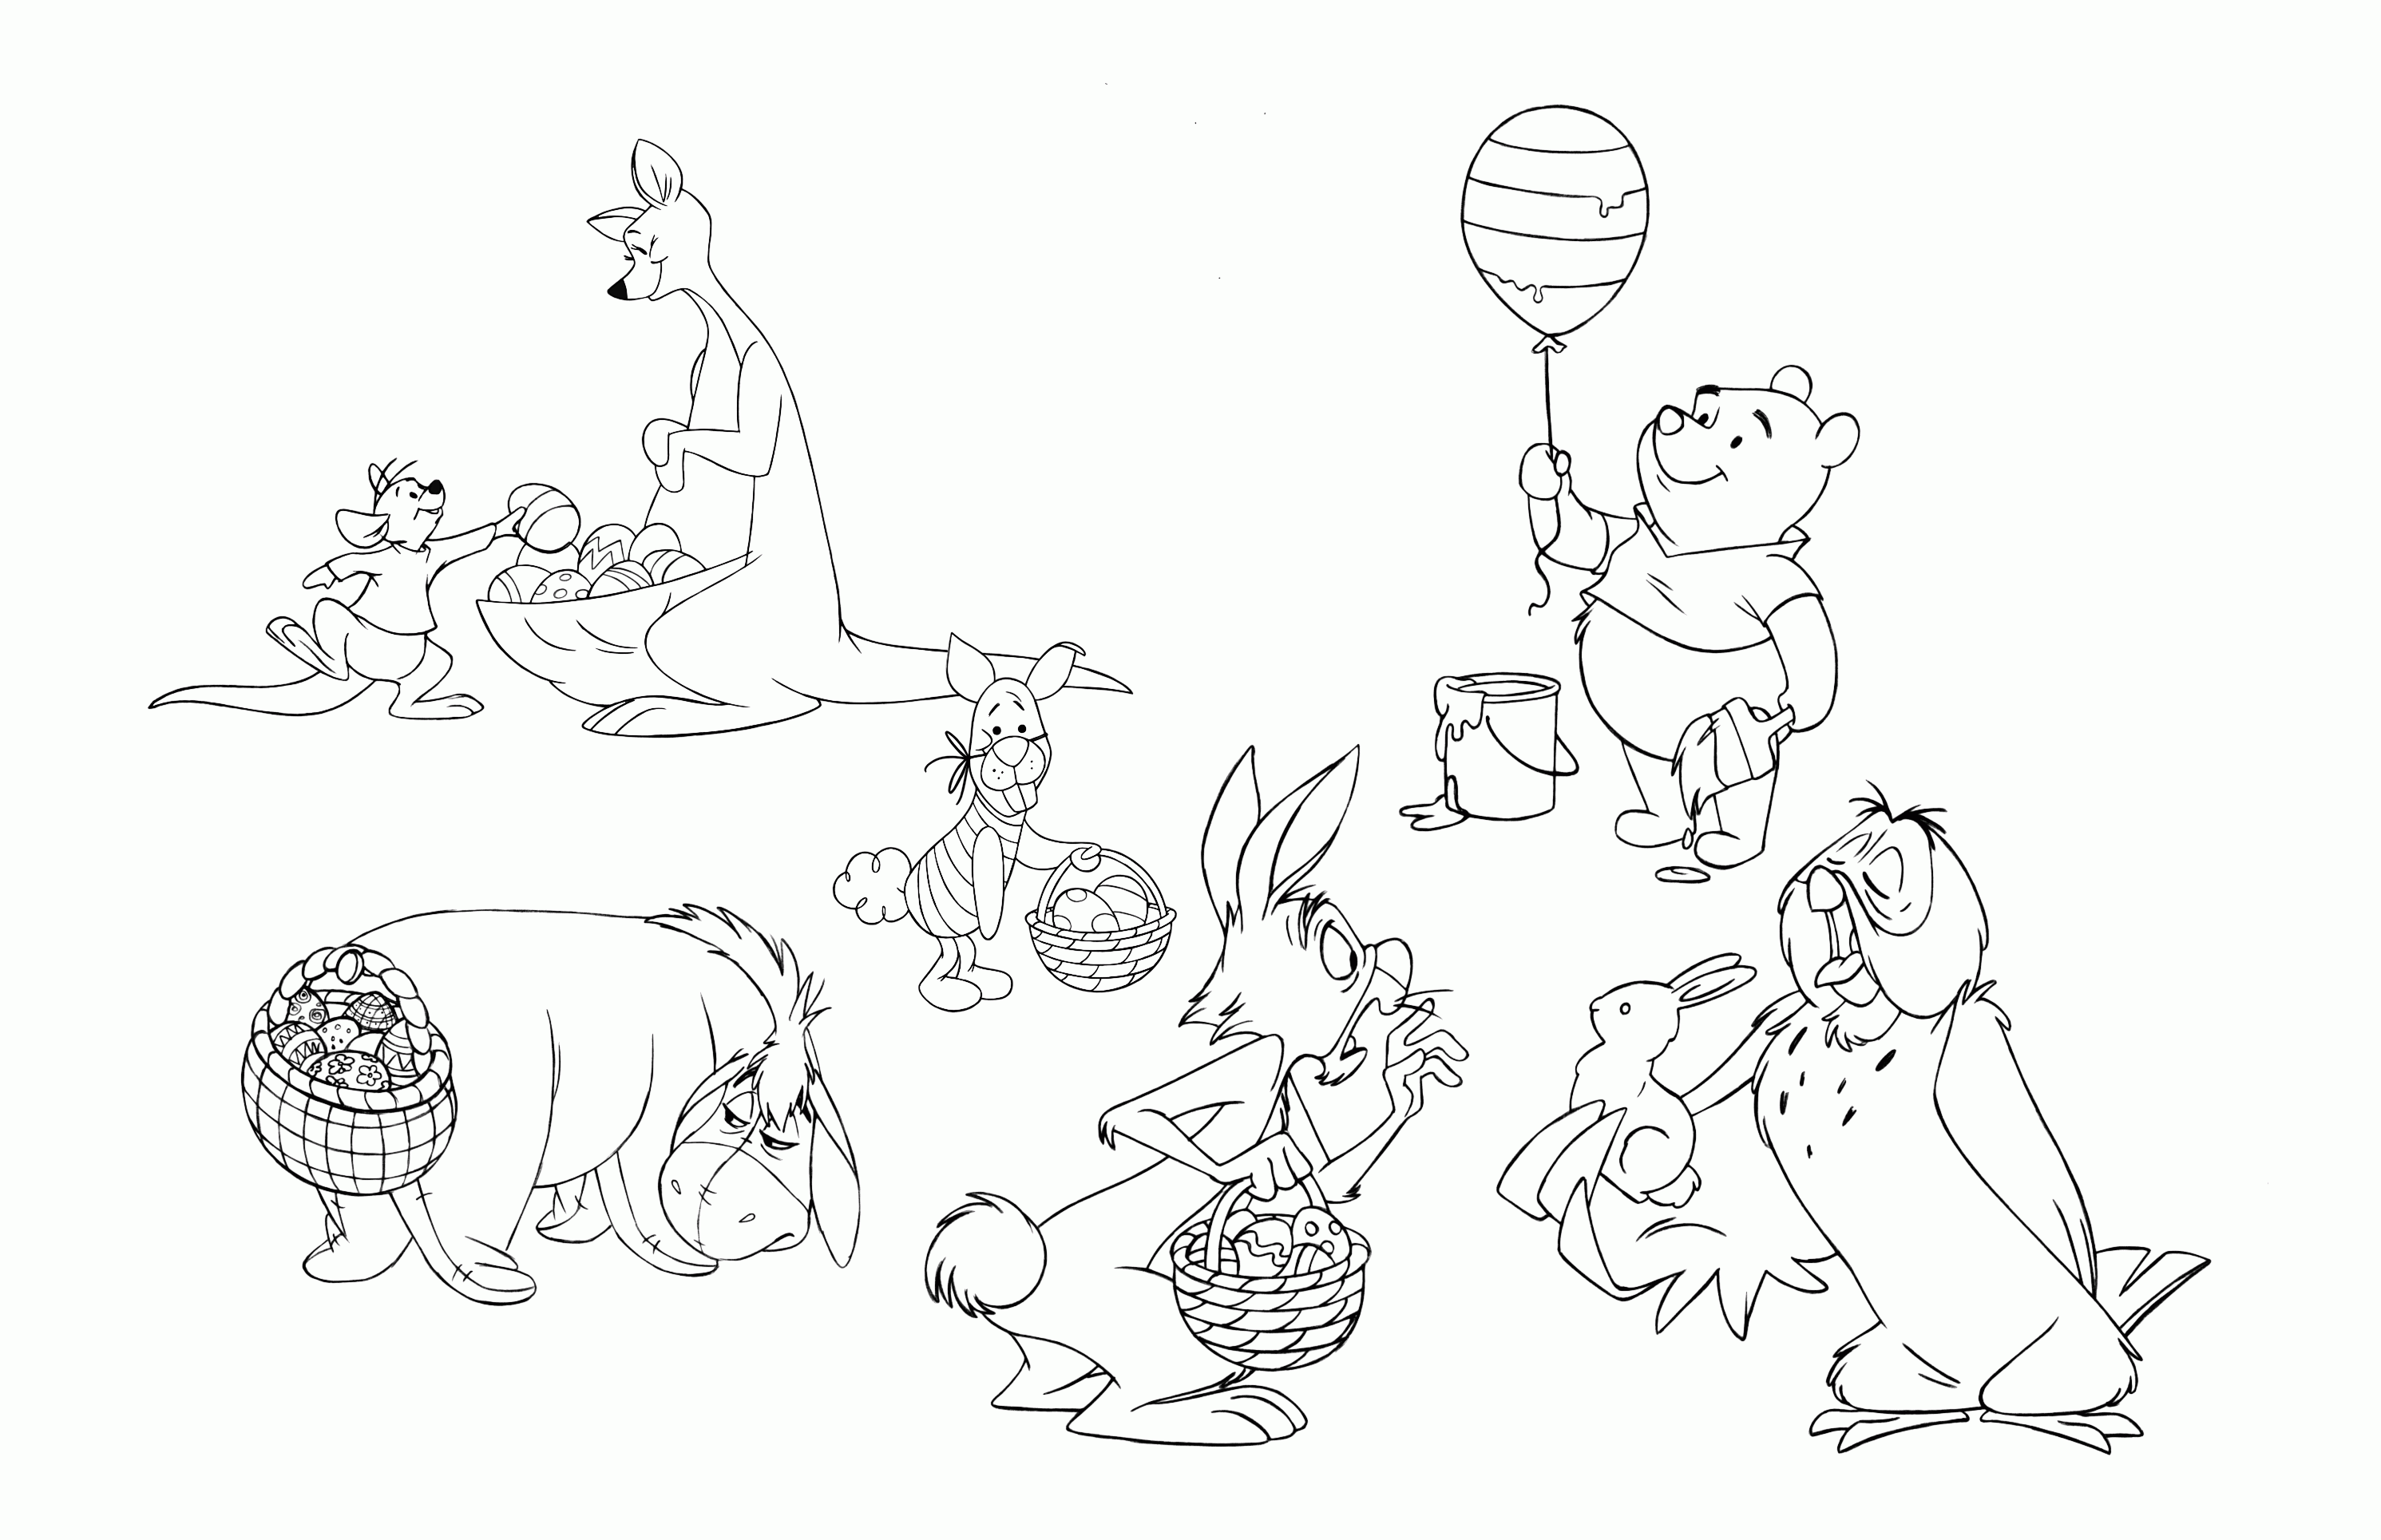 Free Winnie the Pooh Coloring Pages From Disney - Living on Love ...